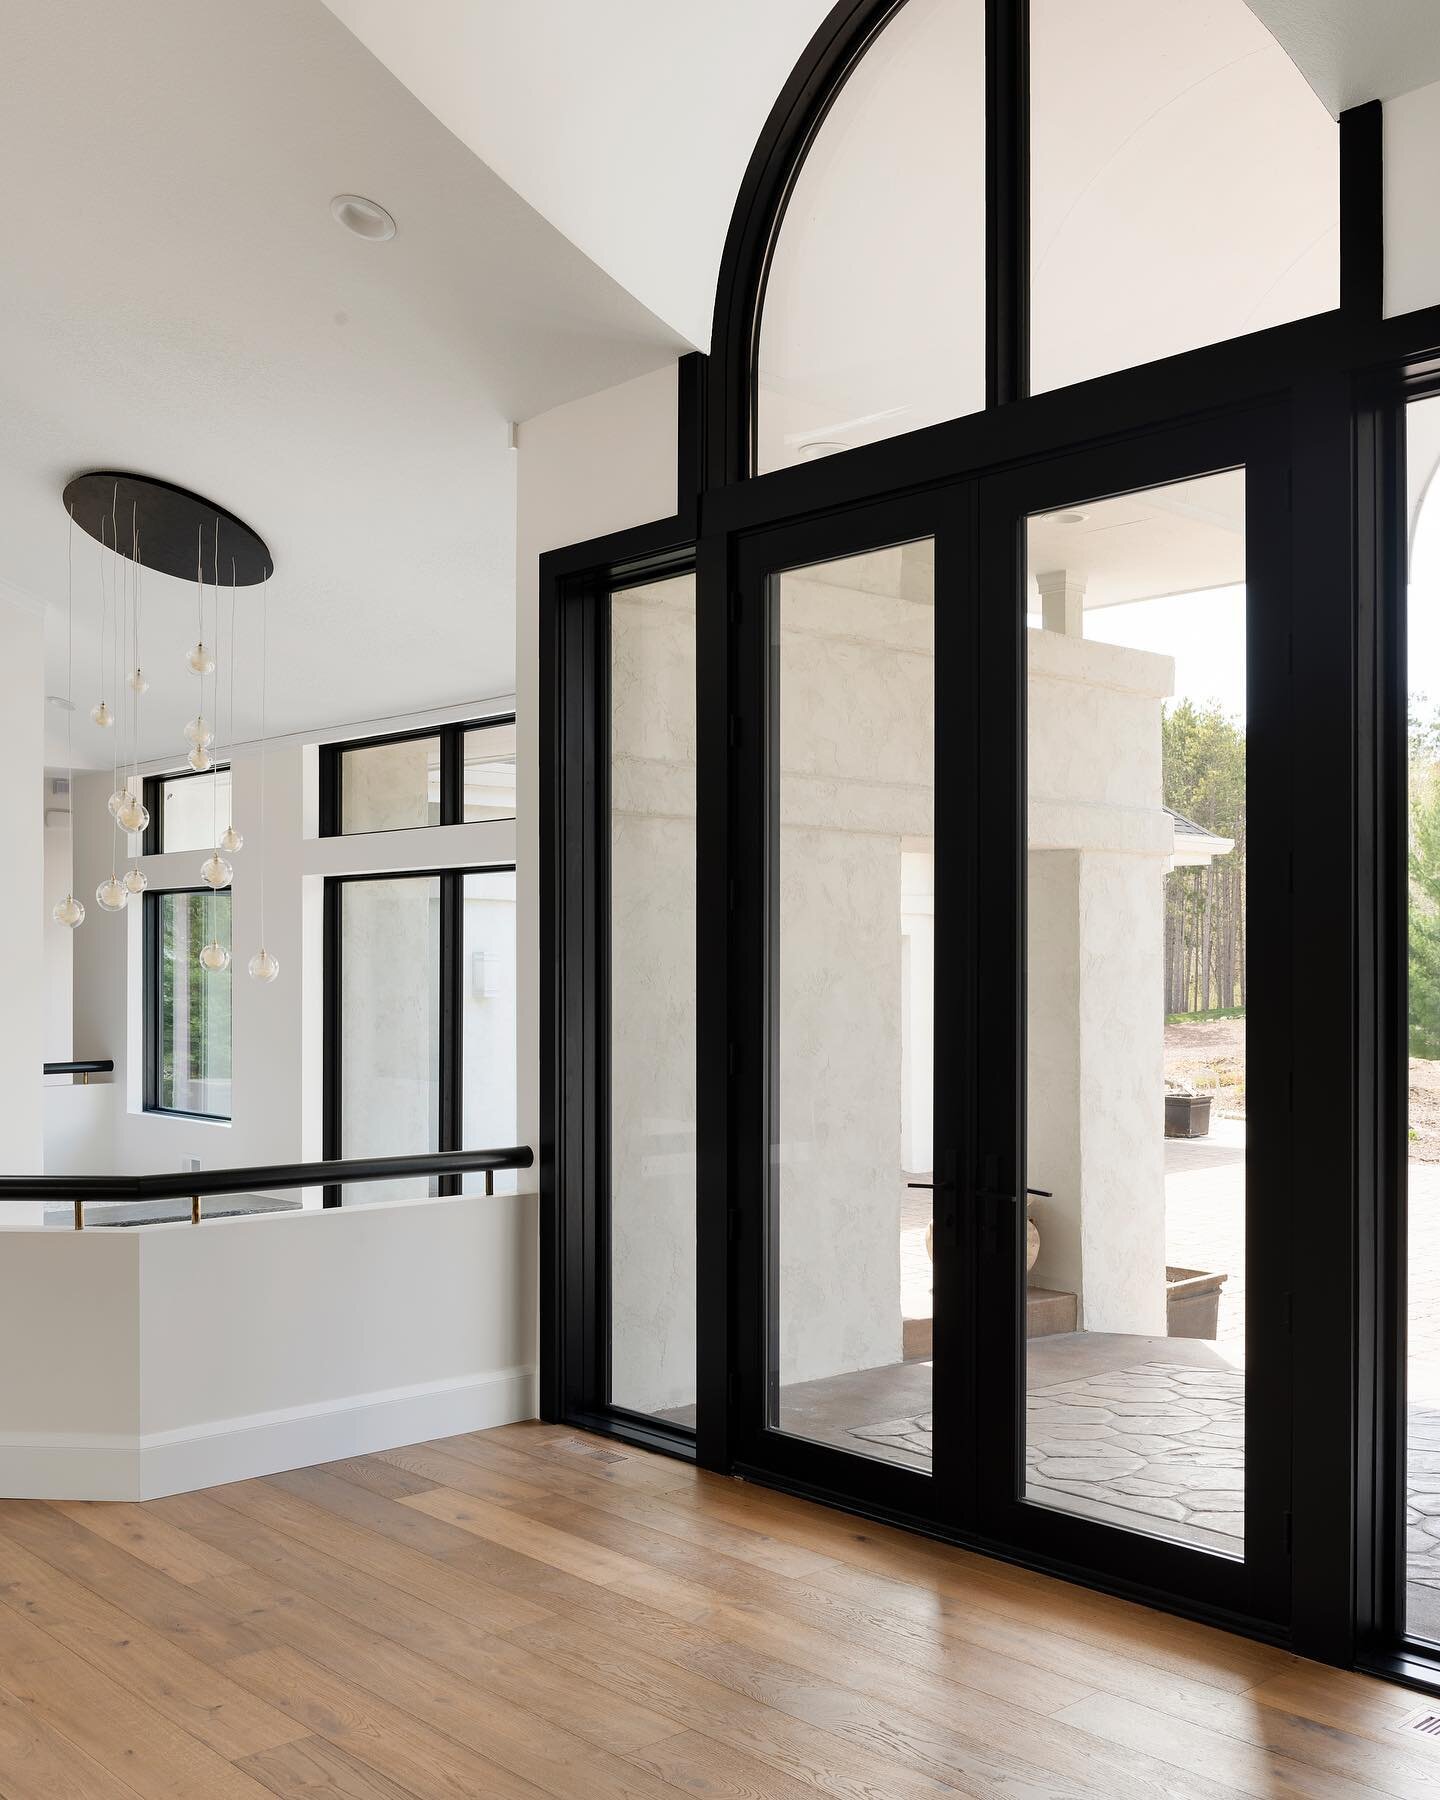 In this remodel project, @kellifontanadesigns worked closely with @pellawindows to create custom glass doors + windows to add a contemporary edge to this bold and elegant family retreat. Swipe to see a before!➡️

Design ➕ build by @kellifontanadesign